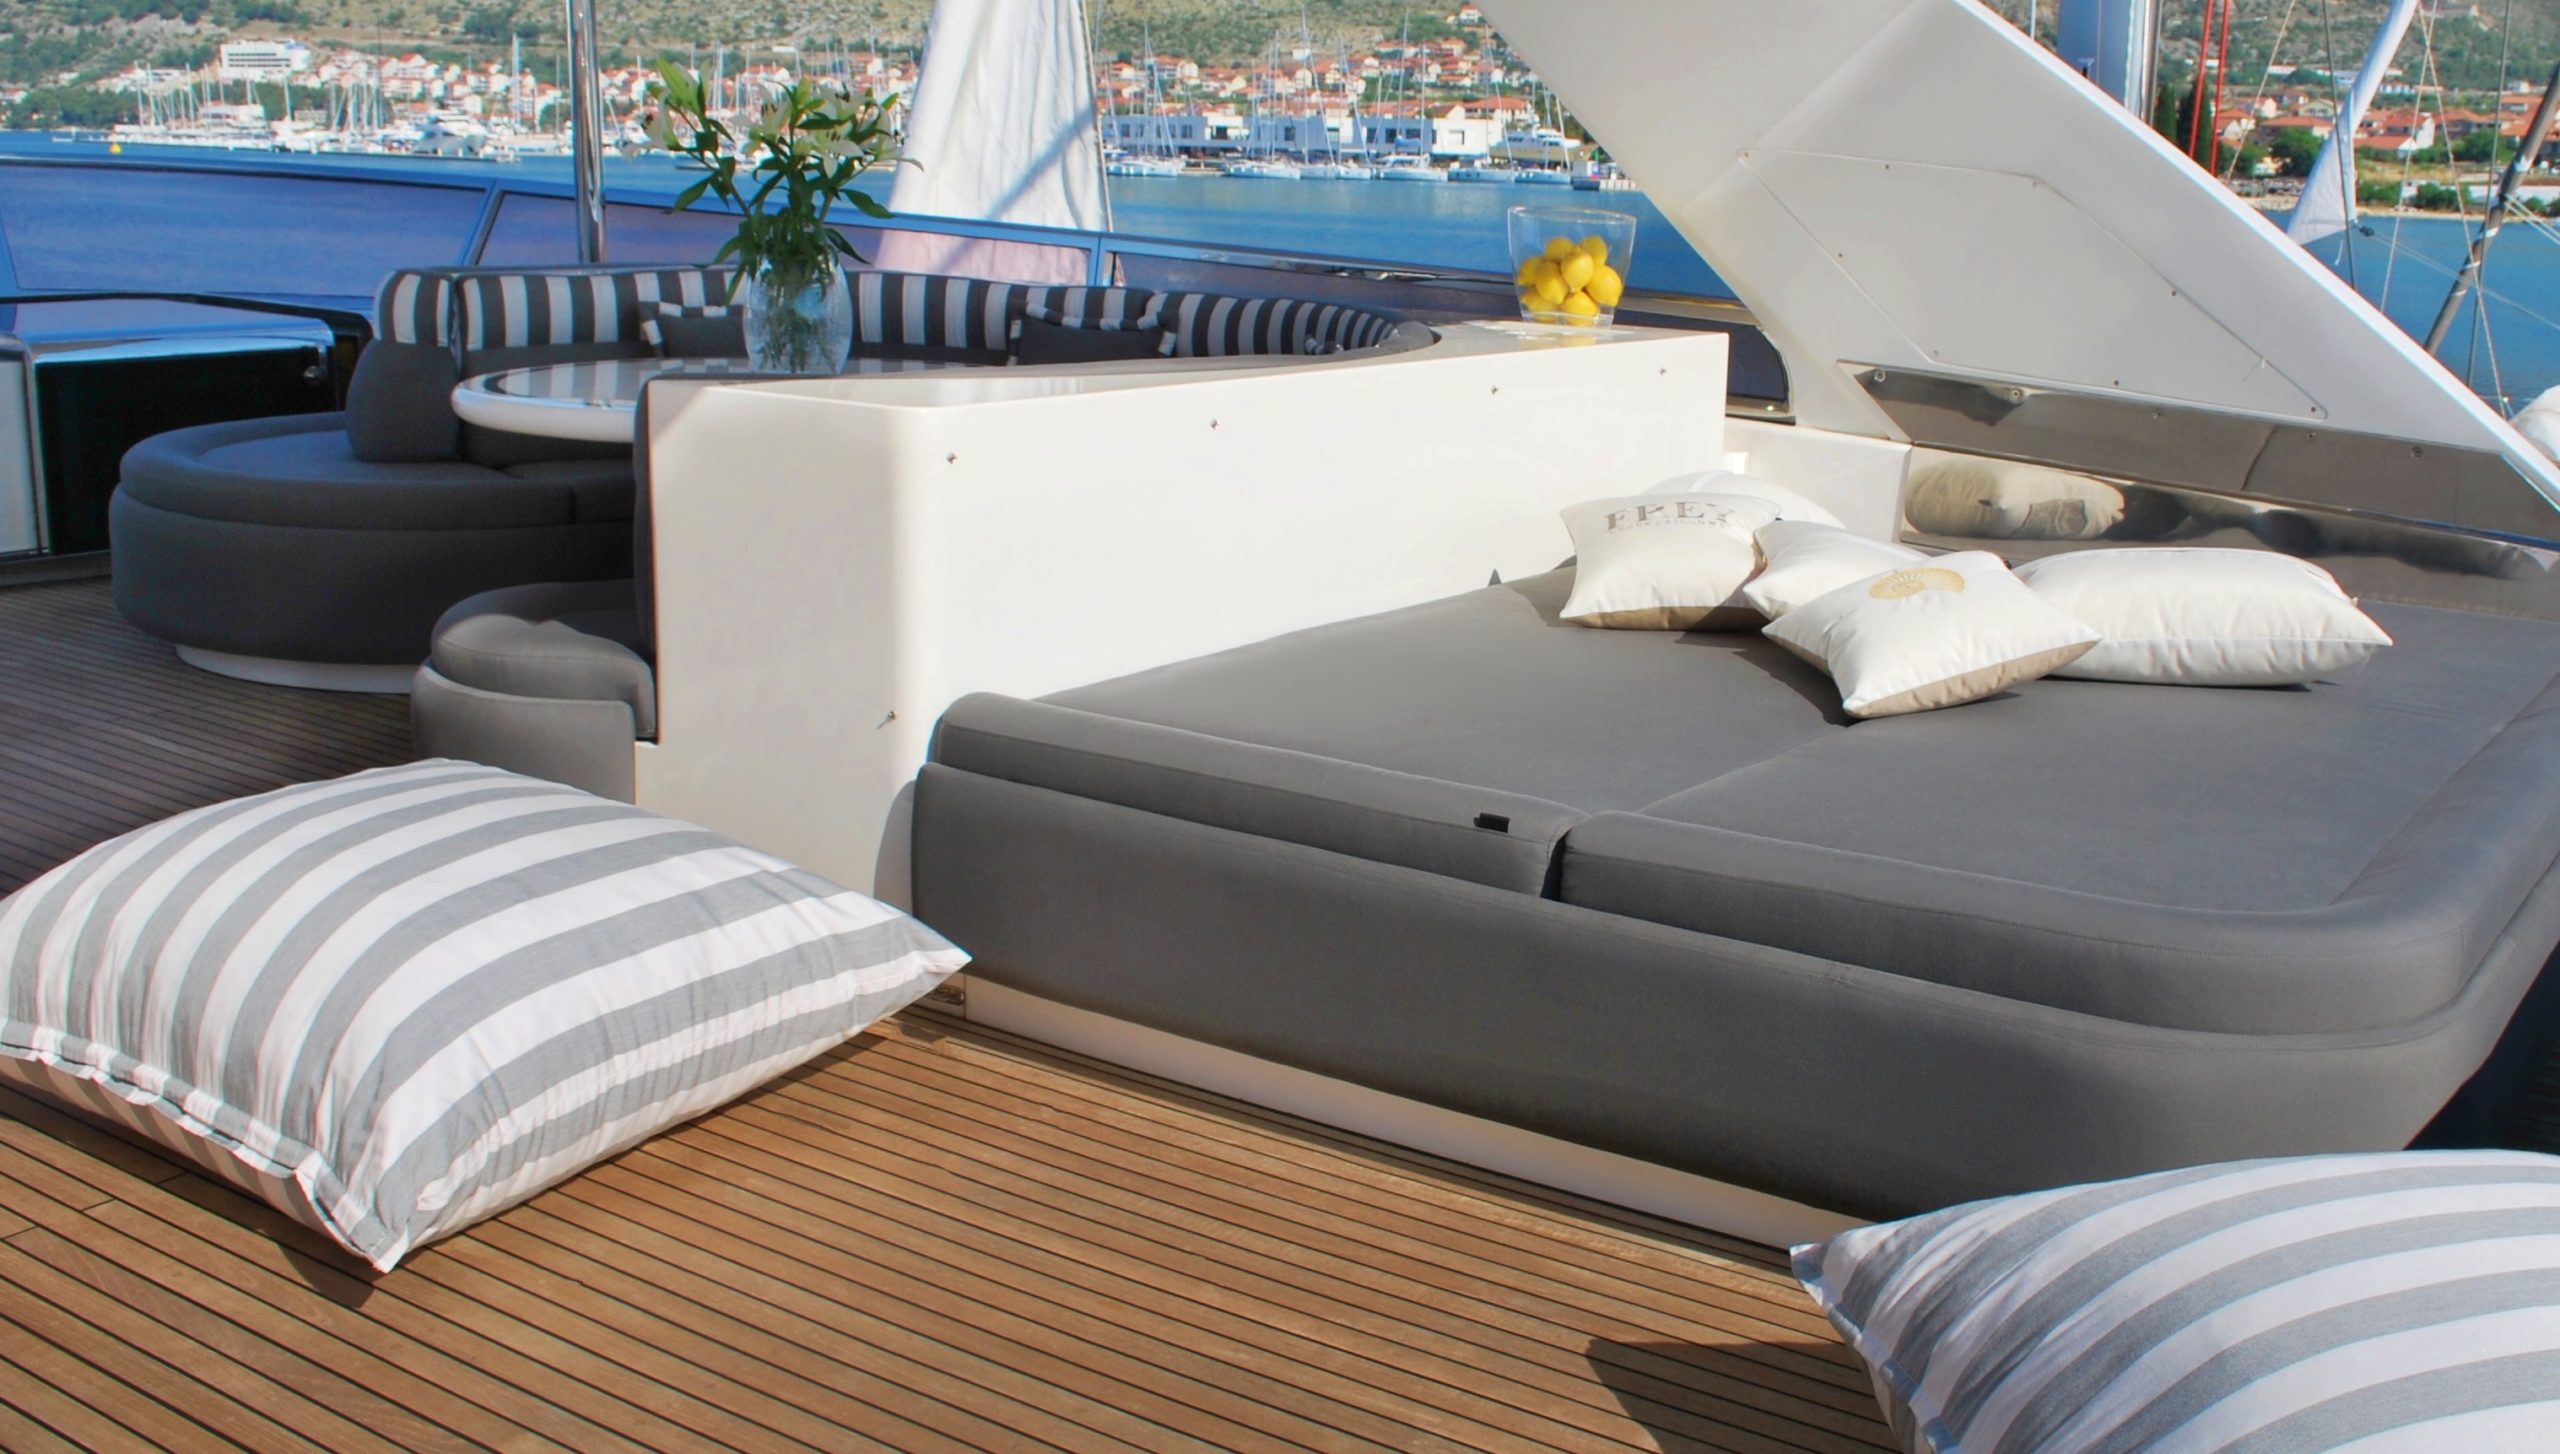 Newly reupholstered sun lounge & flybridge sunbed with Frey Luxury Pillows for complete new exterior for Elegance 78ft yacht.